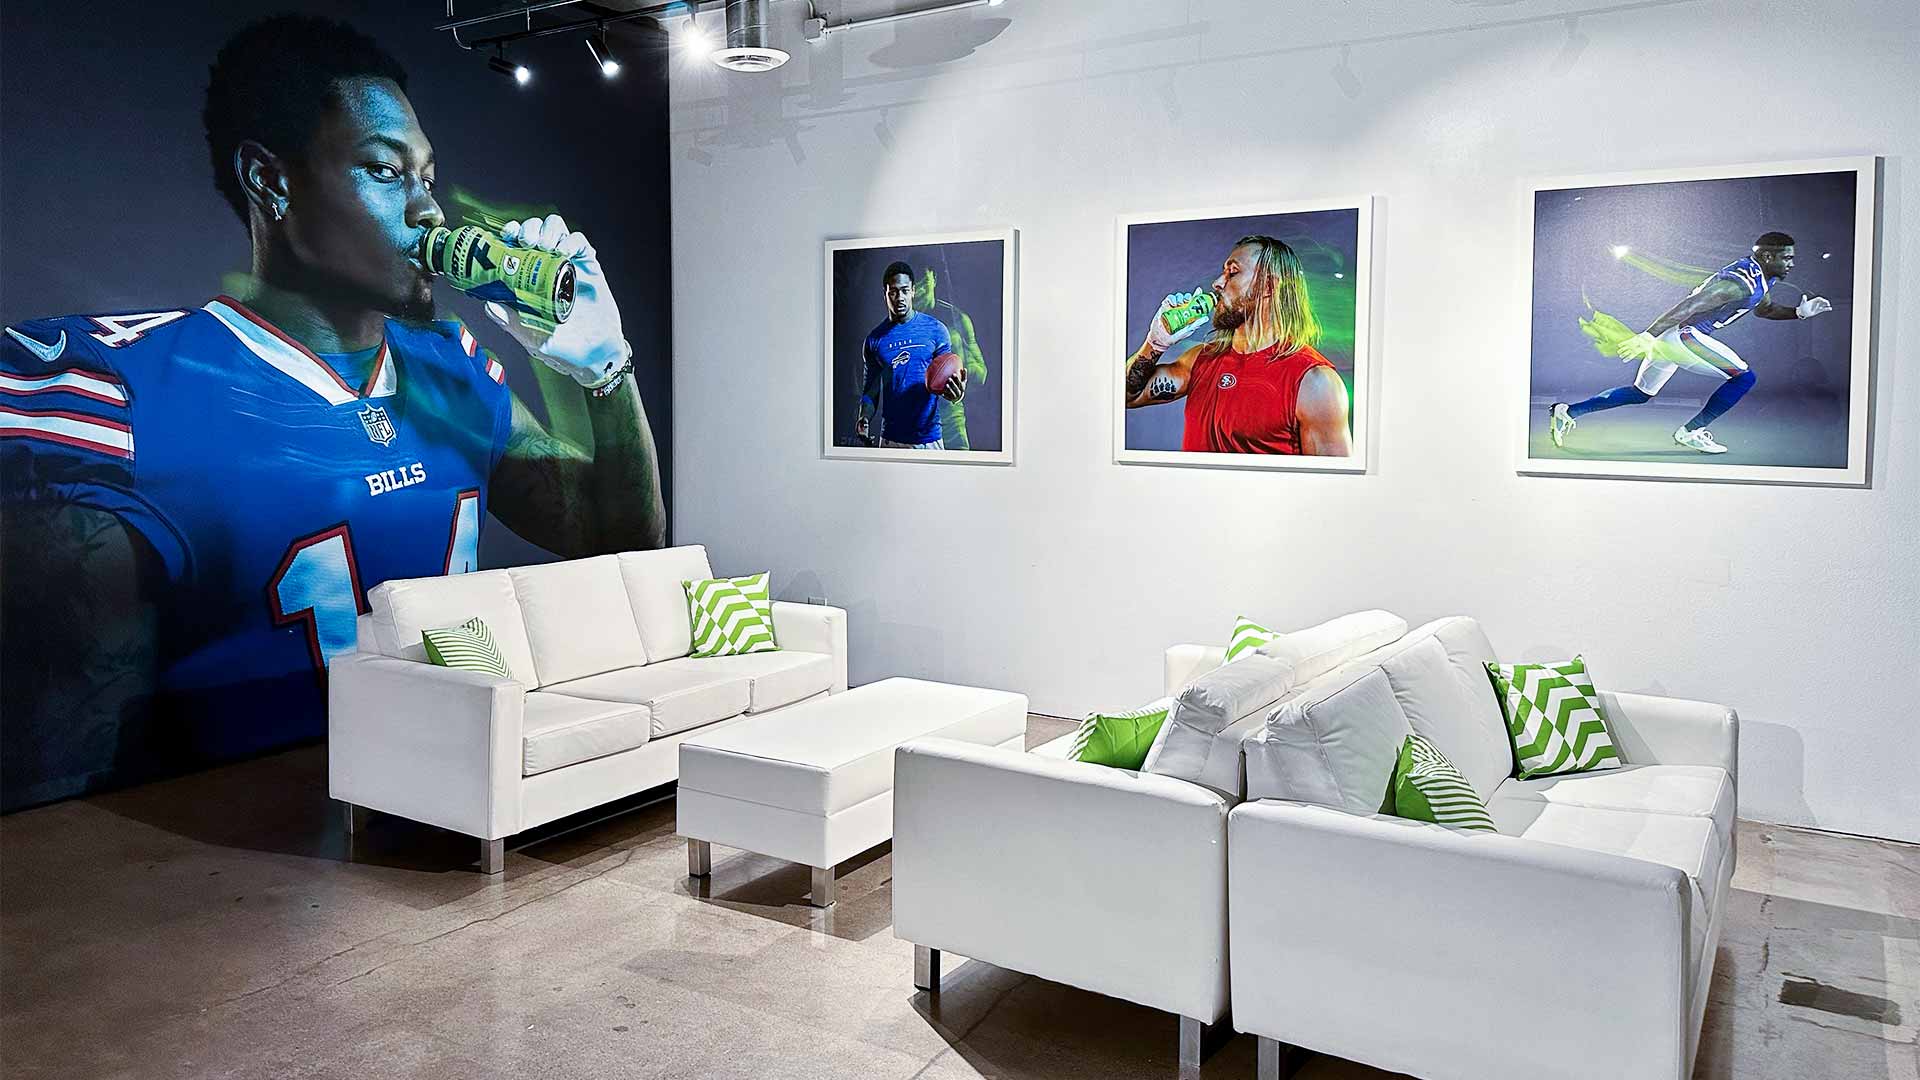 Fast Twitch lounge with sofas and photos of athletes drinking Fast Twitch.